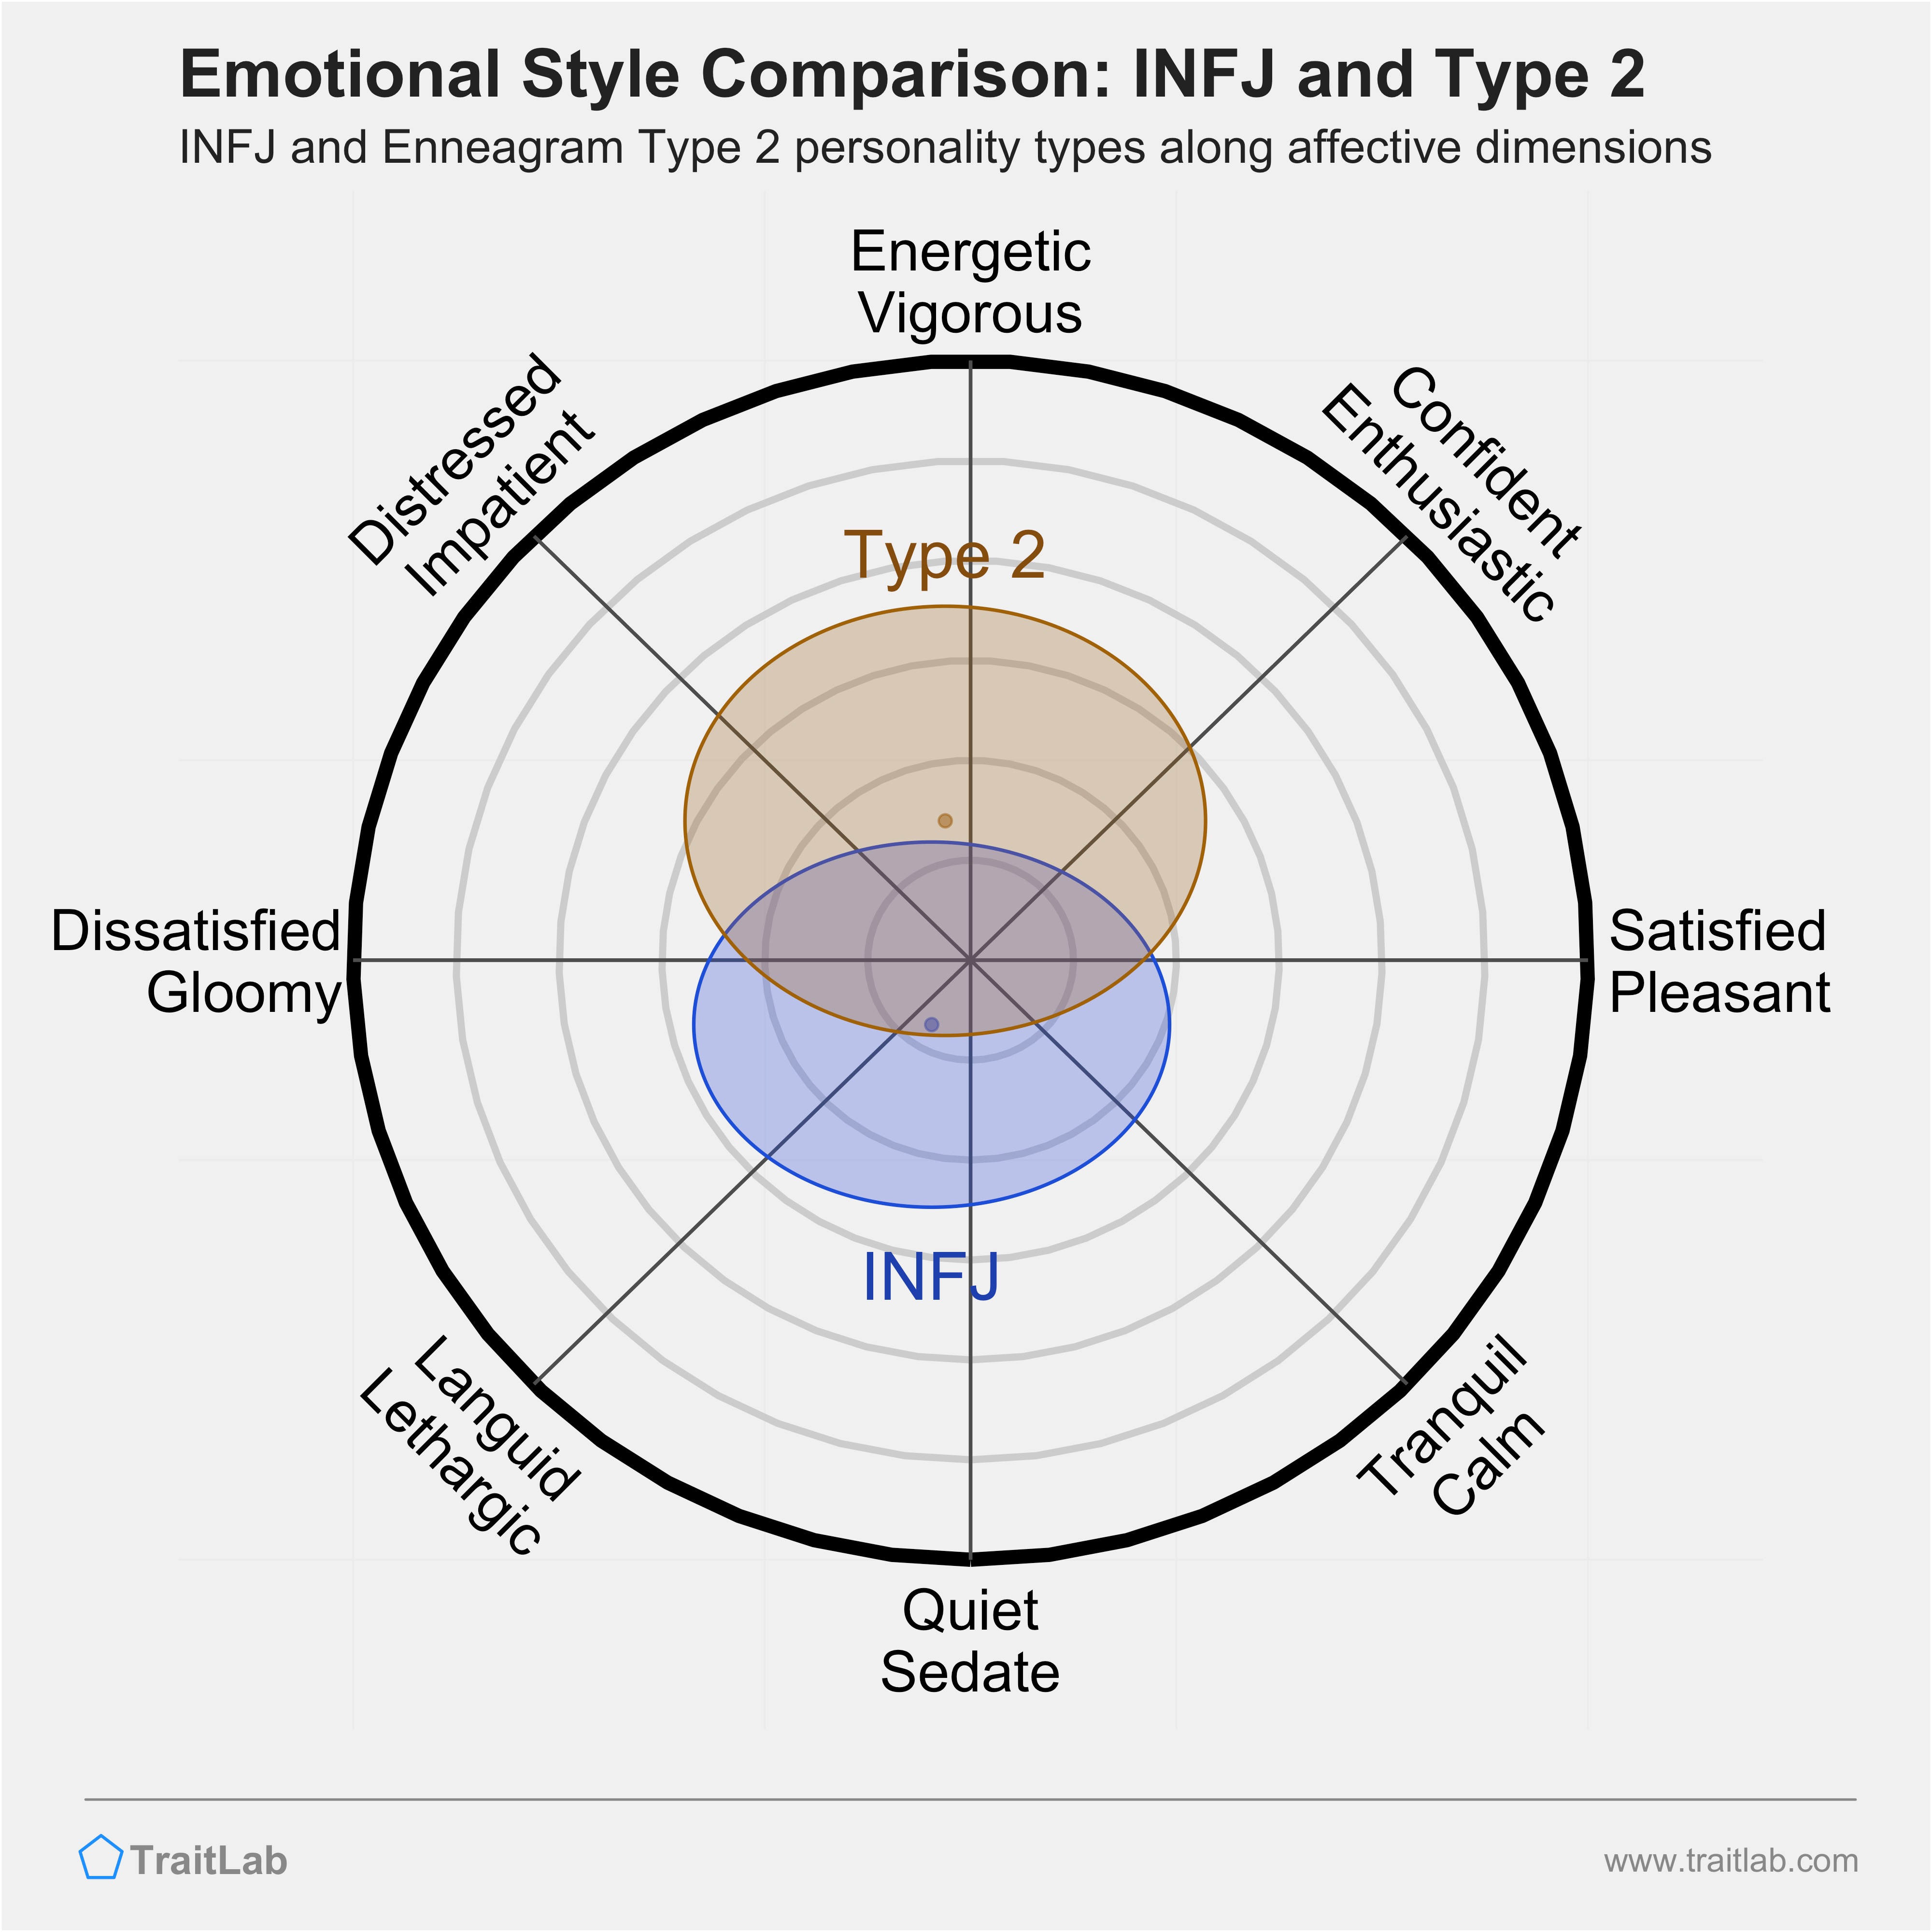 INFJ and Type 2 comparison across emotional (affective) dimensions